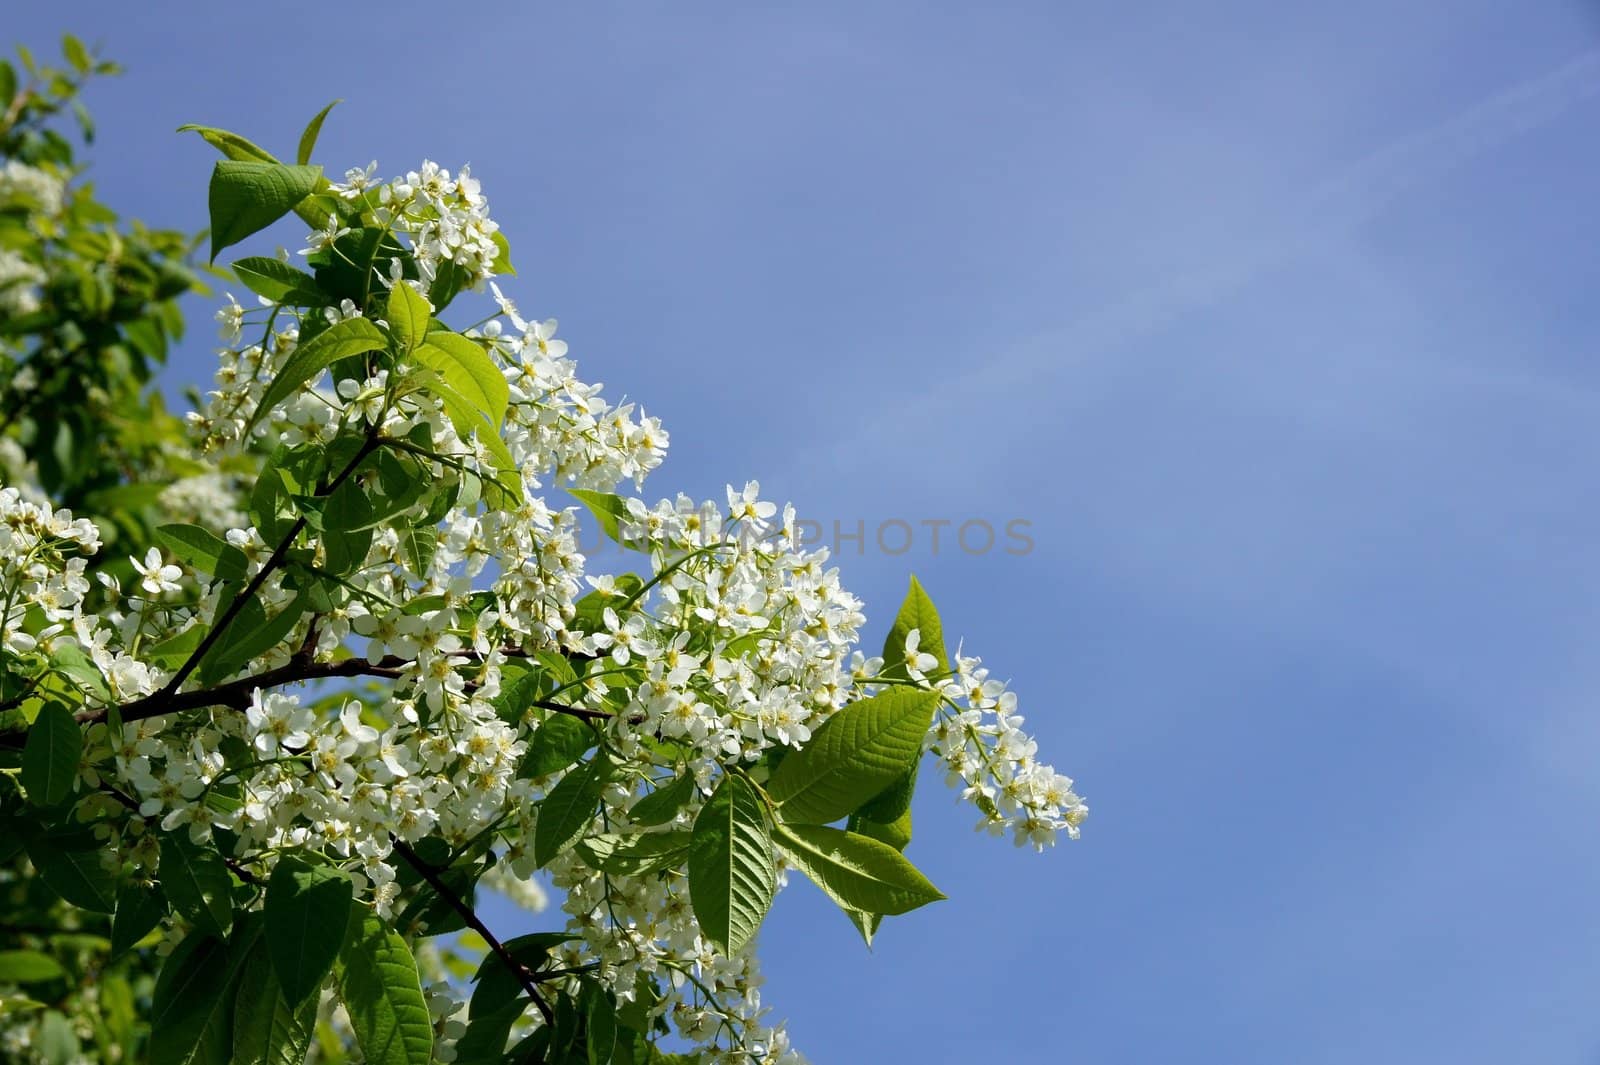 Flowers of a bird cherry and the blue sky